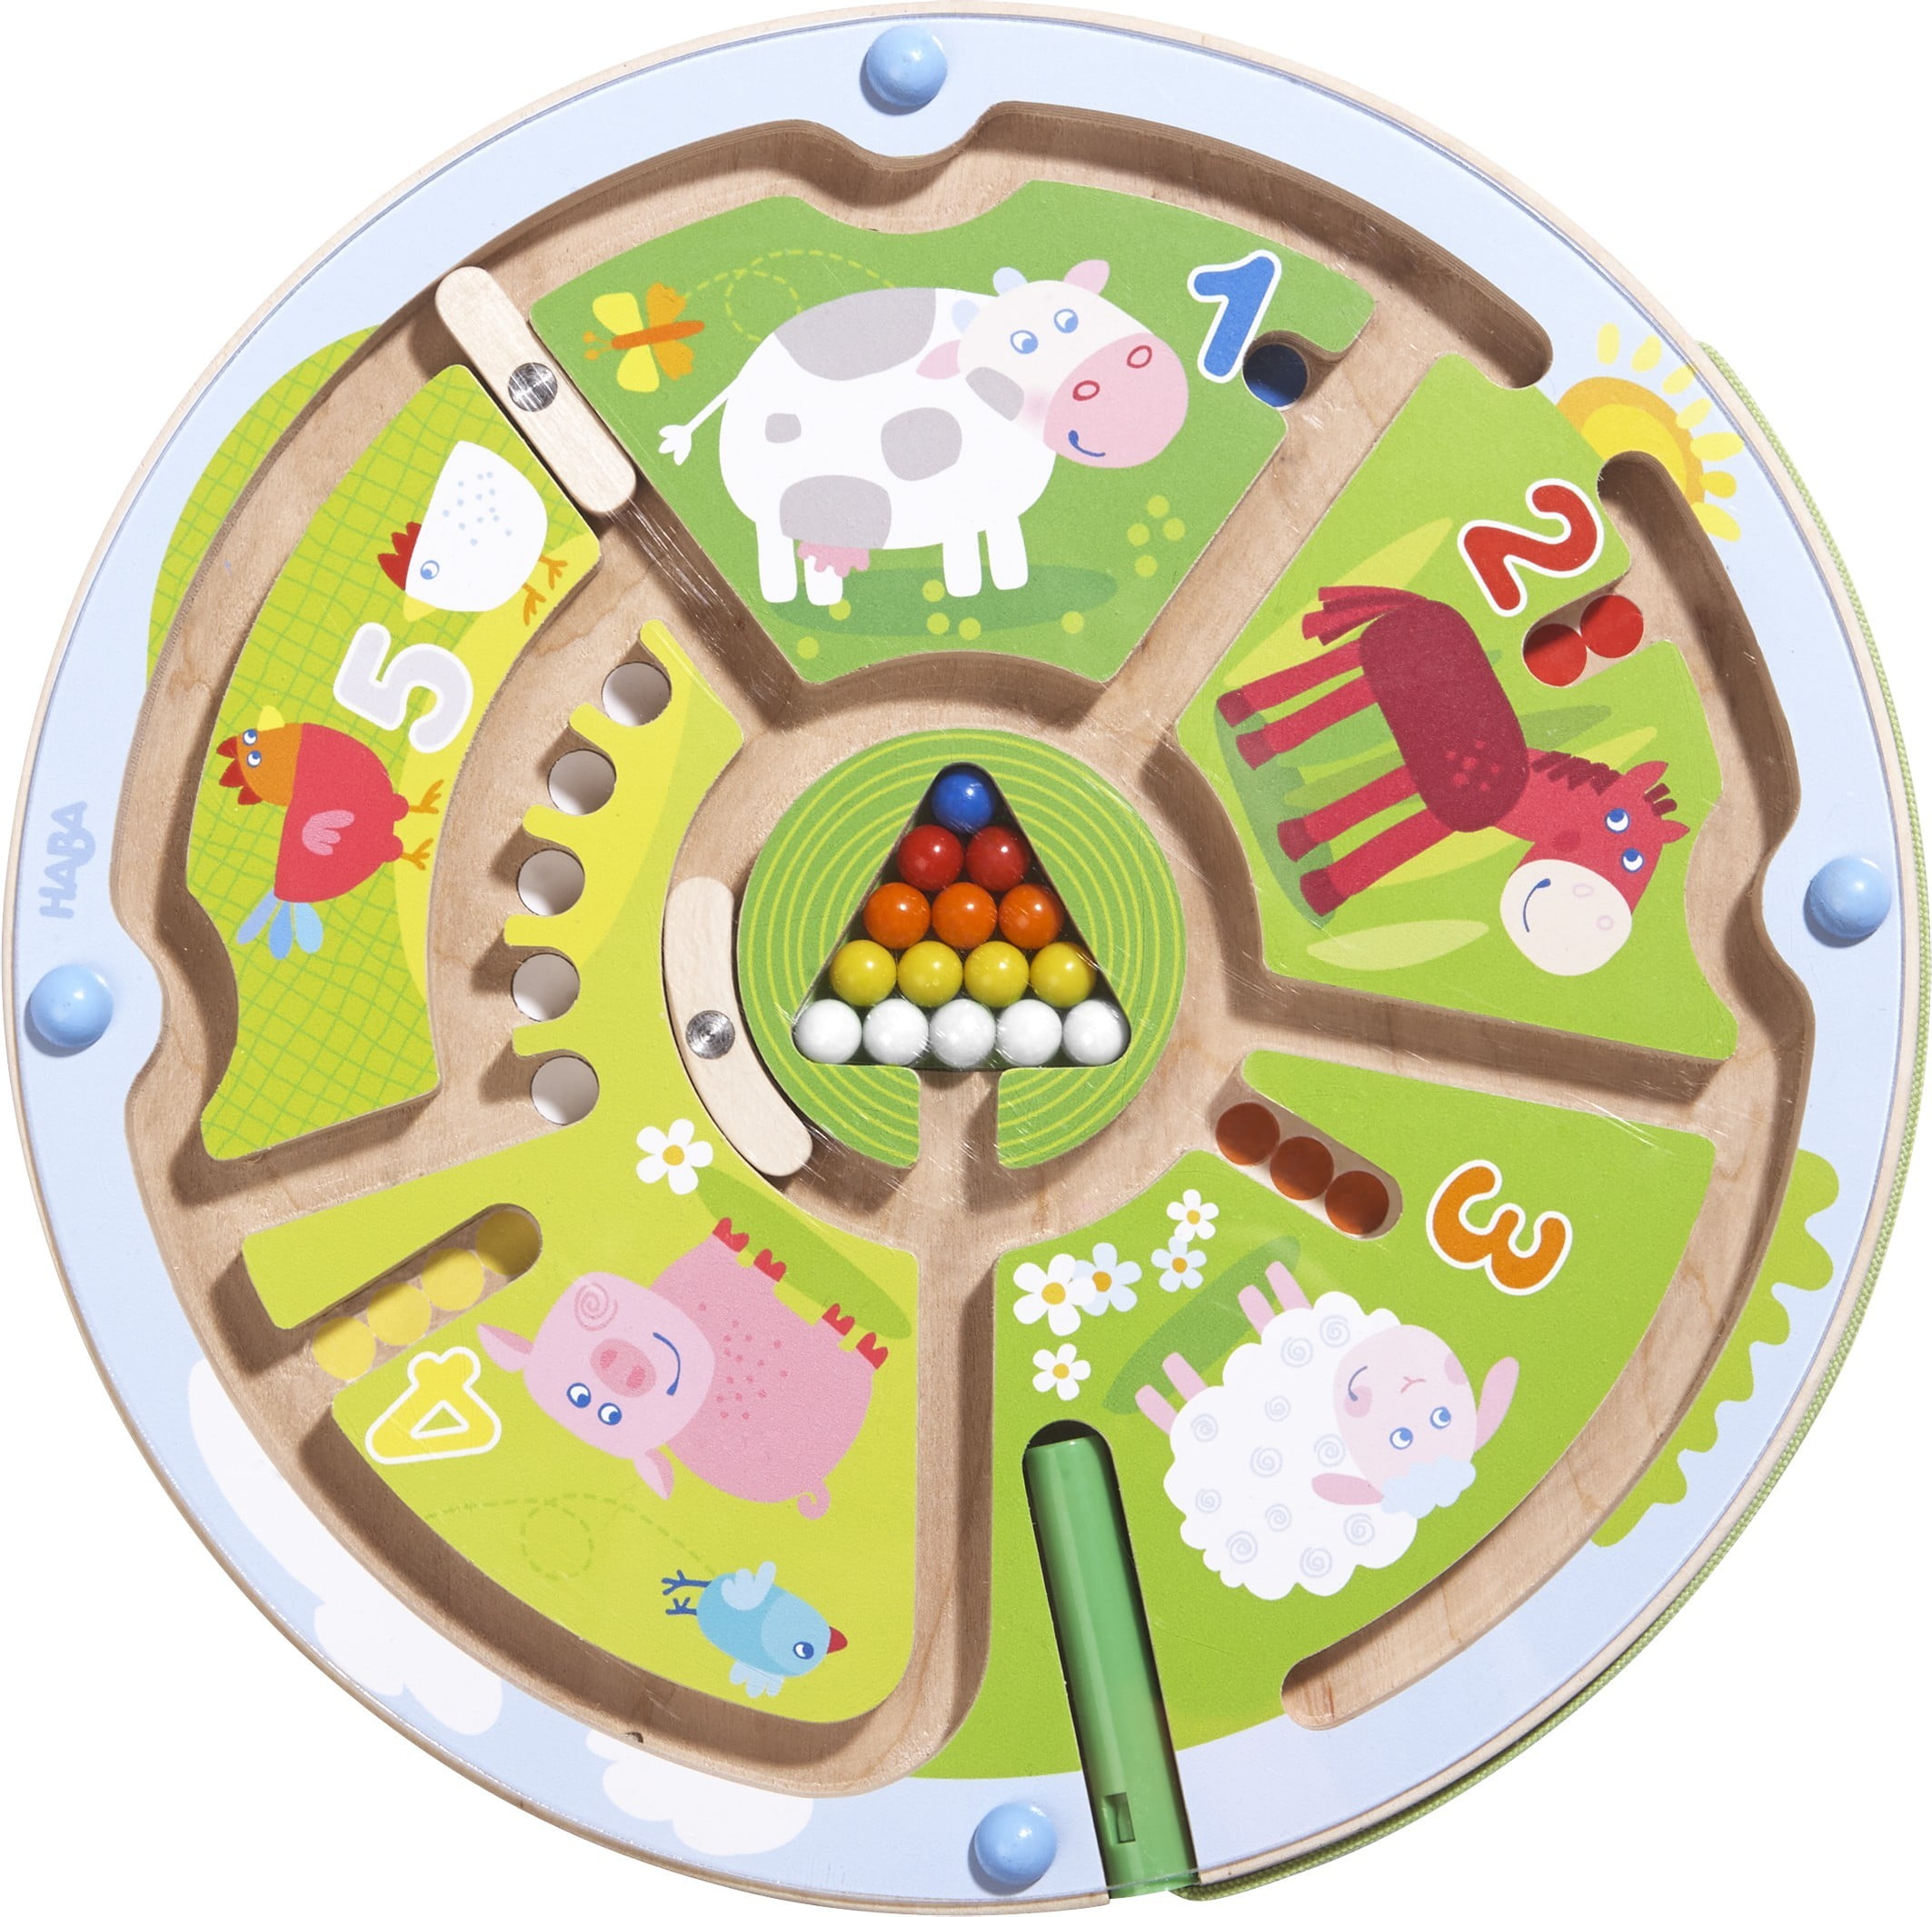 Haba Number Maze Magnetic Game Stem Toy 